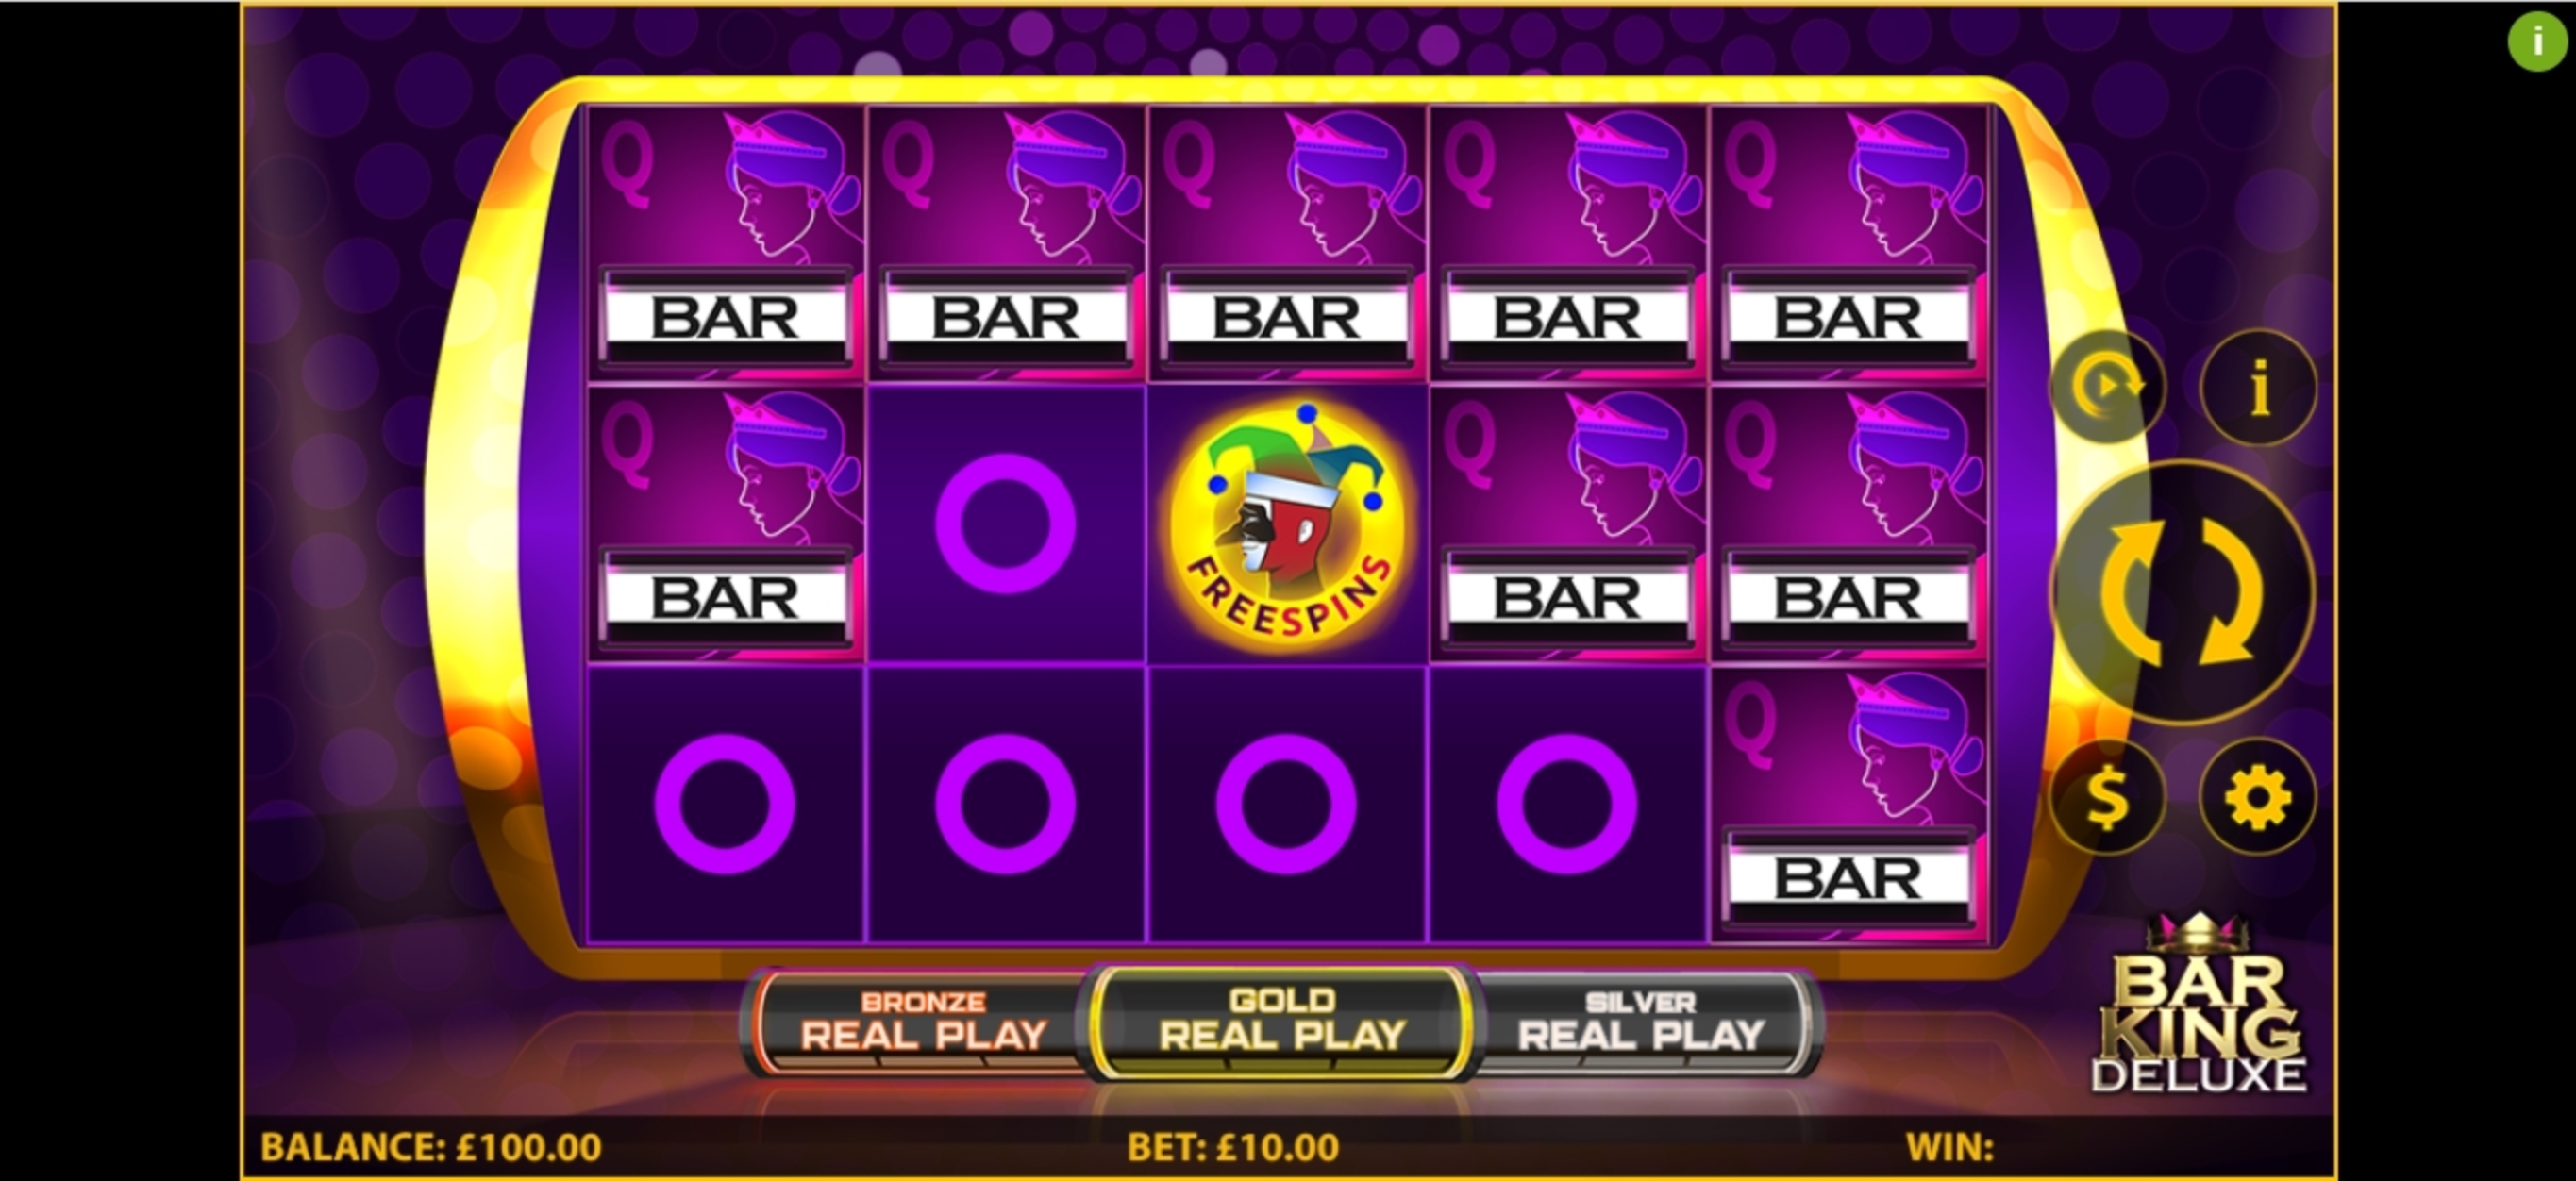 Win Money in Bar King Deluxe Free Slot Game by HungryBear